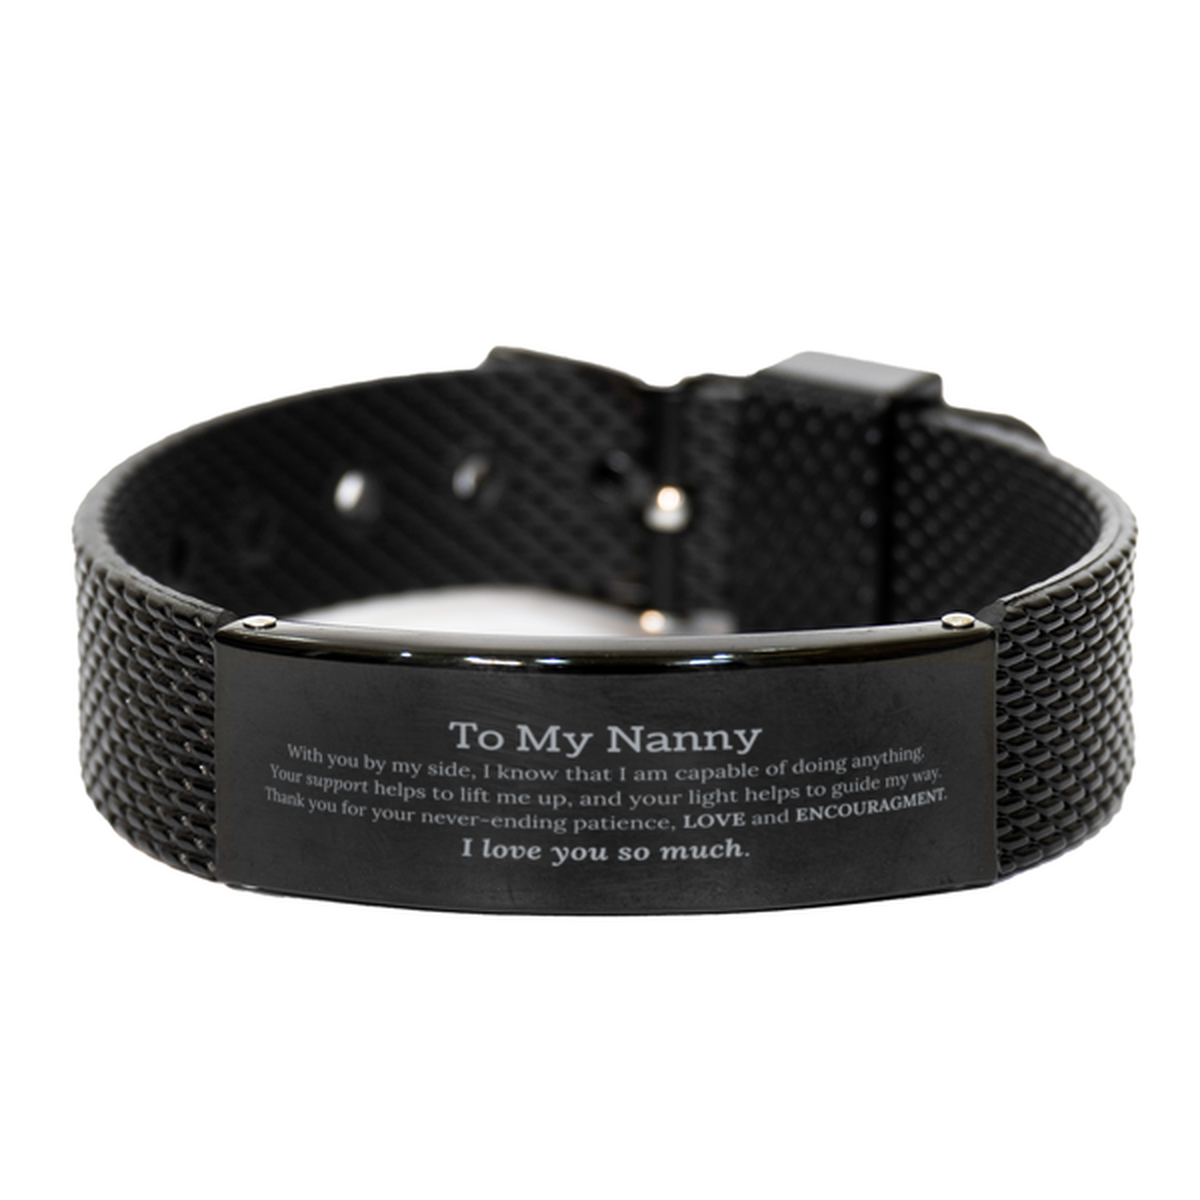 Appreciation Nanny Black Shark Mesh Bracelet Gifts, To My Nanny Birthday Christmas Wedding Keepsake Gifts for Nanny With you by my side, I know that I am capable of doing anything. I love you so much